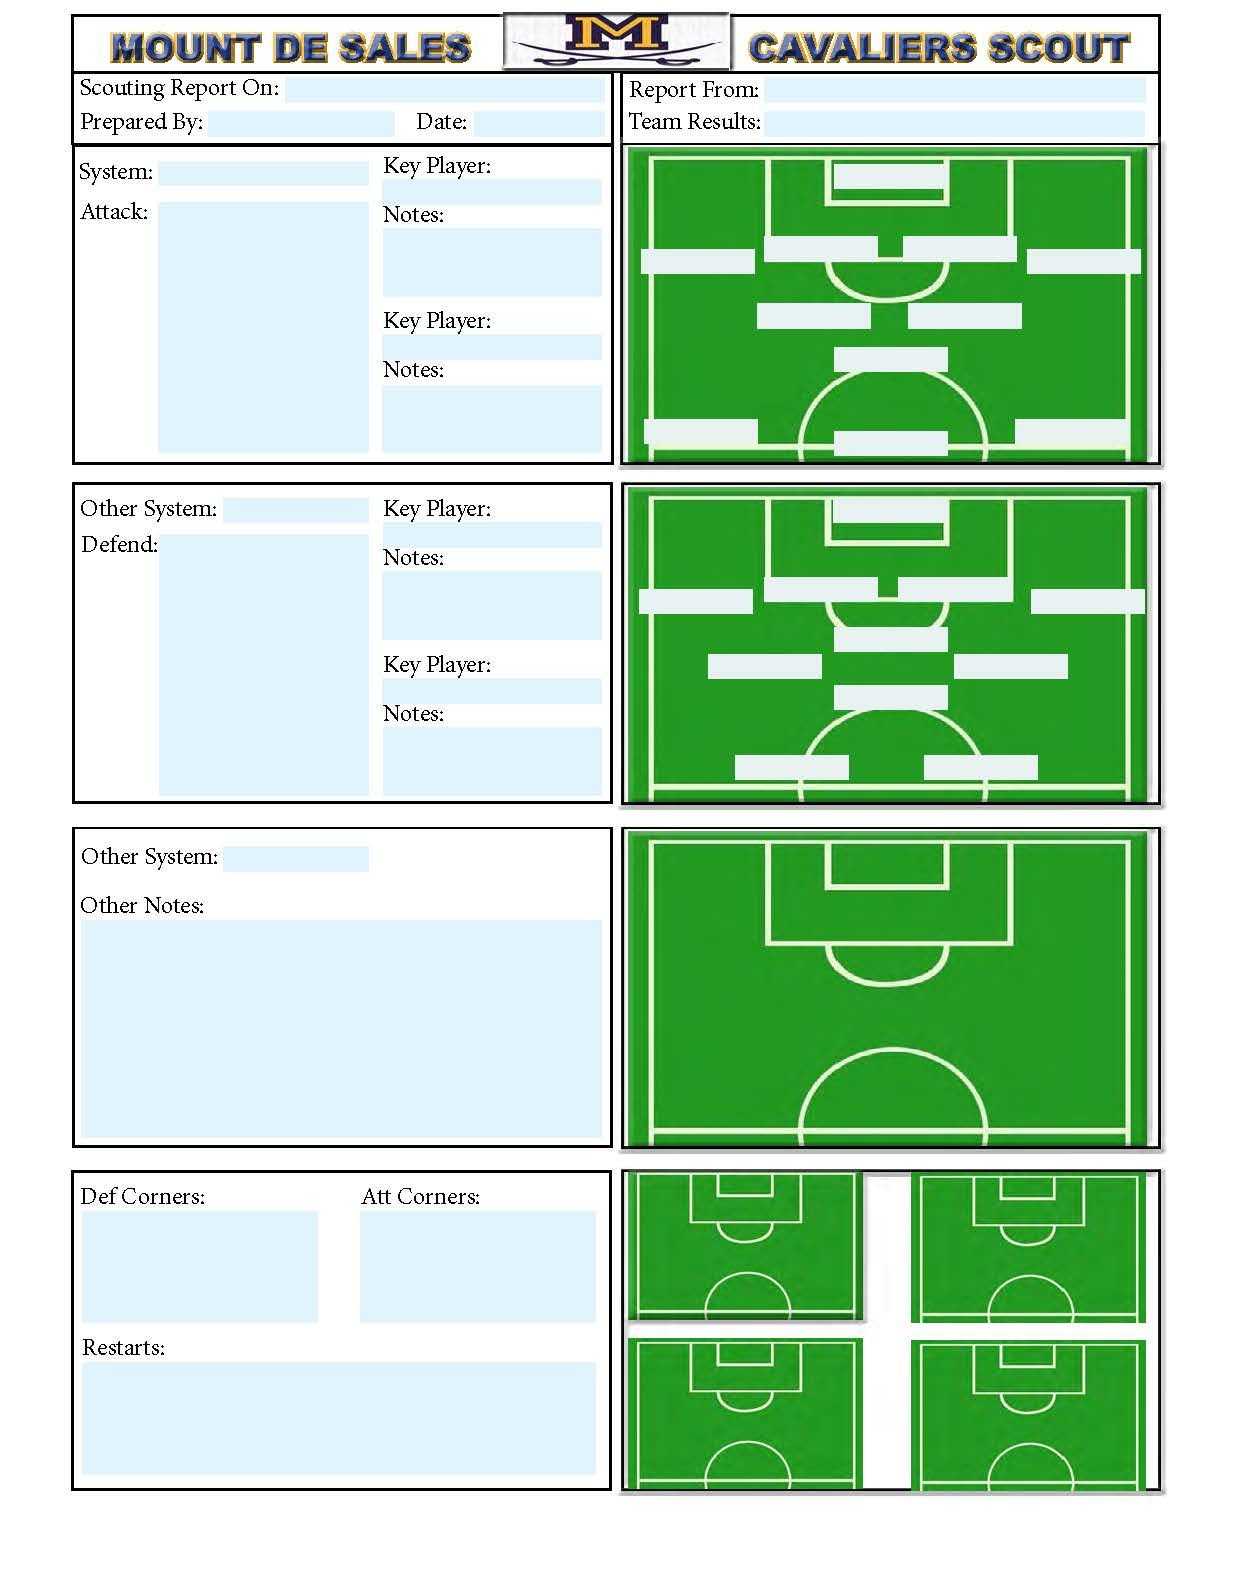 Soccer Scouting Template | Other Designs | Football Coaching Throughout Football Scouting Report Template